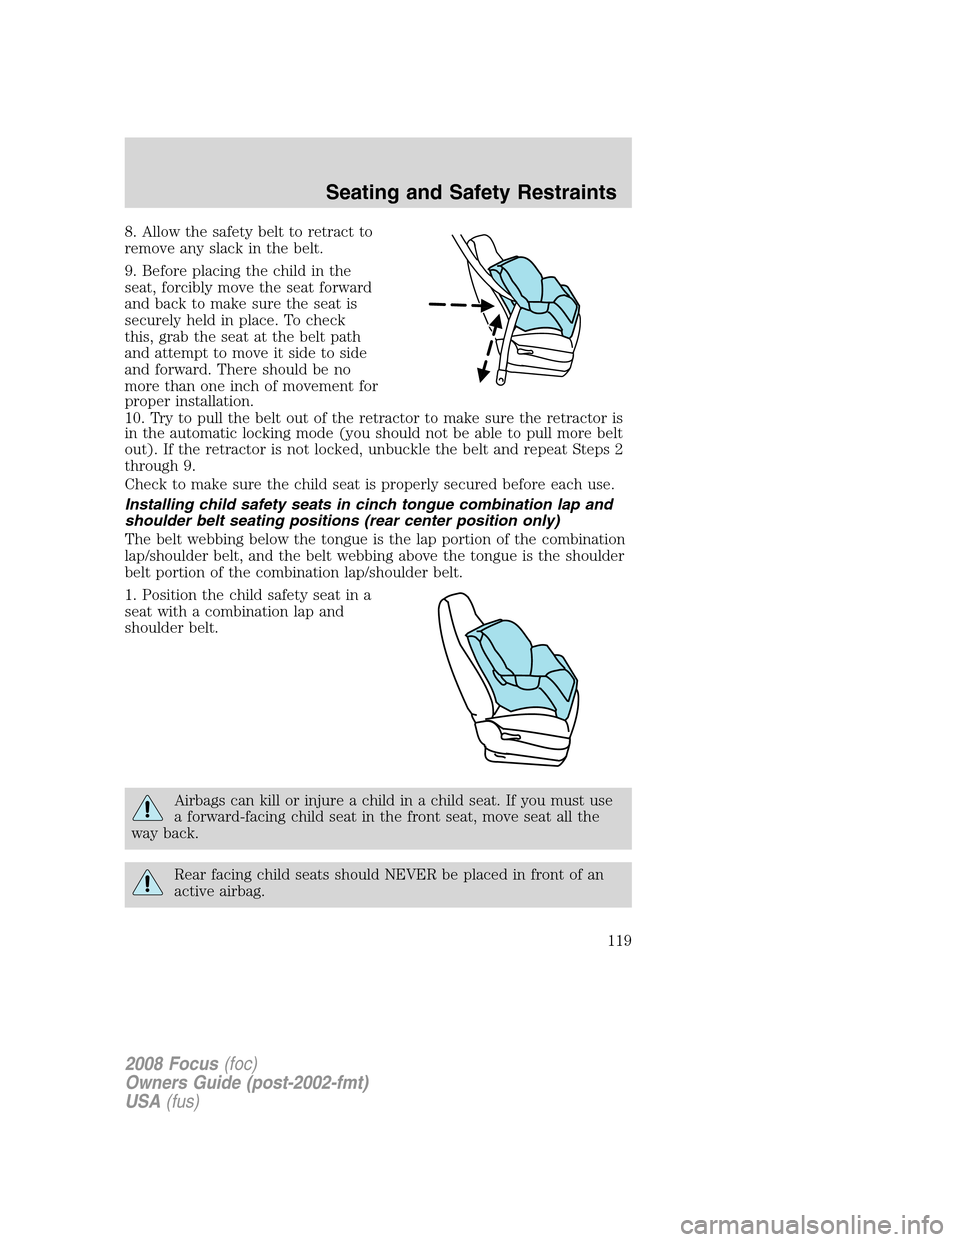 FORD FOCUS 2008 2.G Owners Guide 8. Allow the safety belt to retract to
remove any slack in the belt.
9. Before placing the child in the
seat, forcibly move the seat forward
and back to make sure the seat is
securely held in place. T